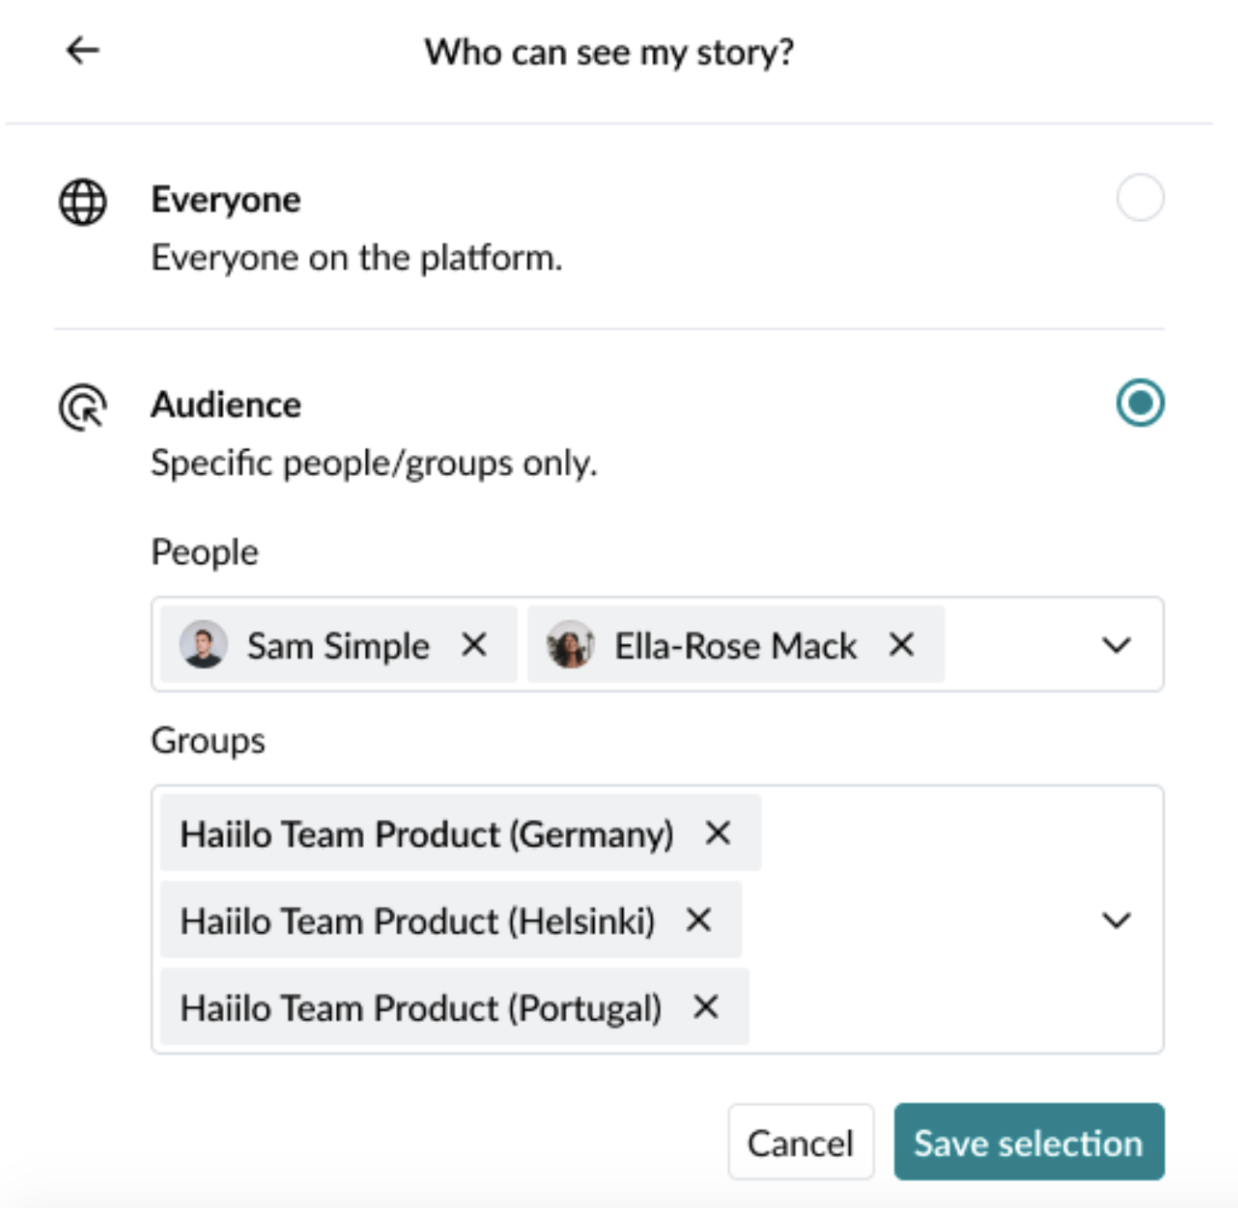 Preview of Haillo's Story settings where you can set audience and visibility preferences.